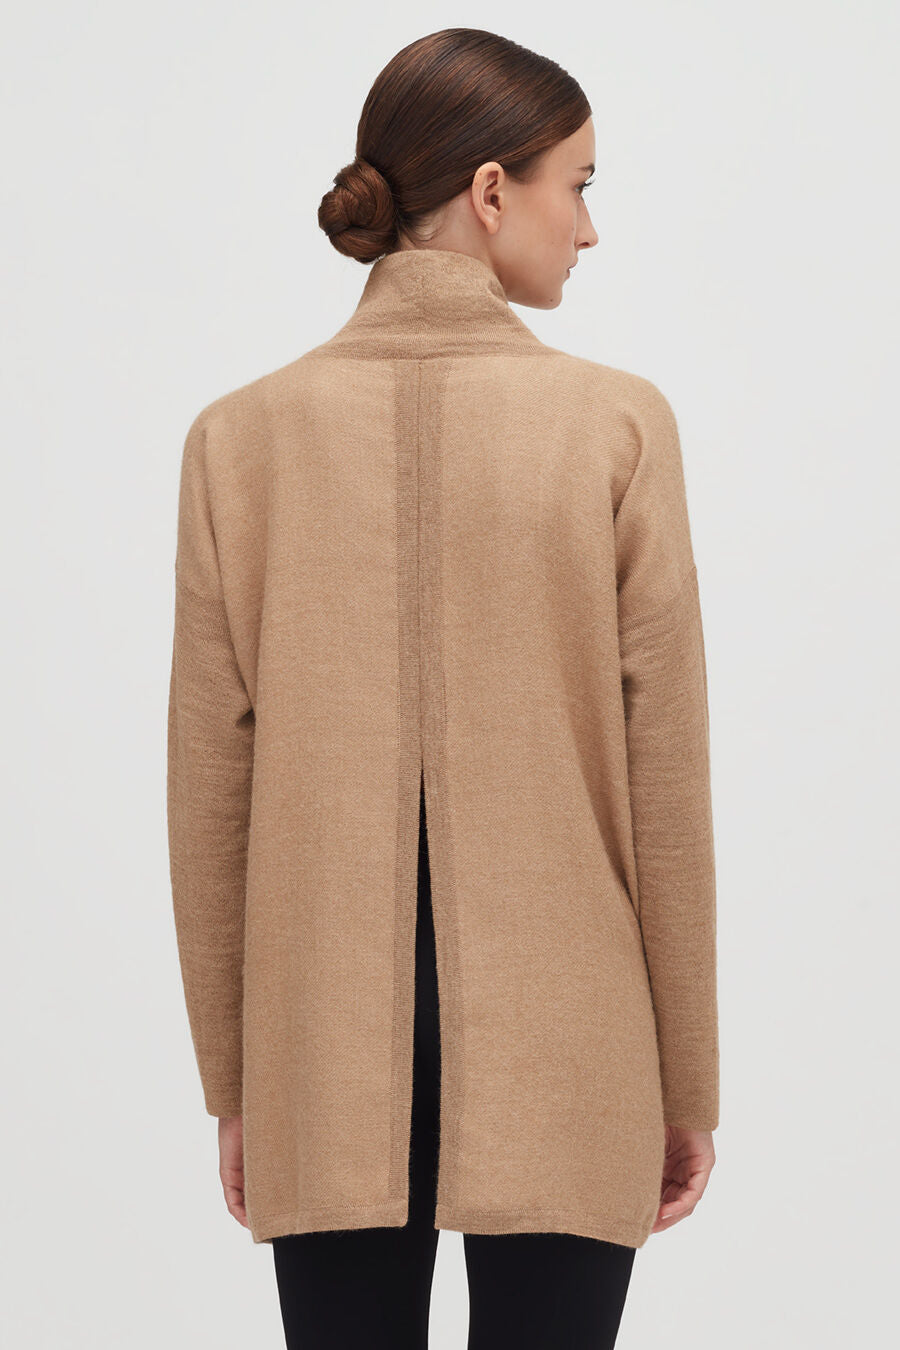 Woman in a high-neck jacket viewed from the back